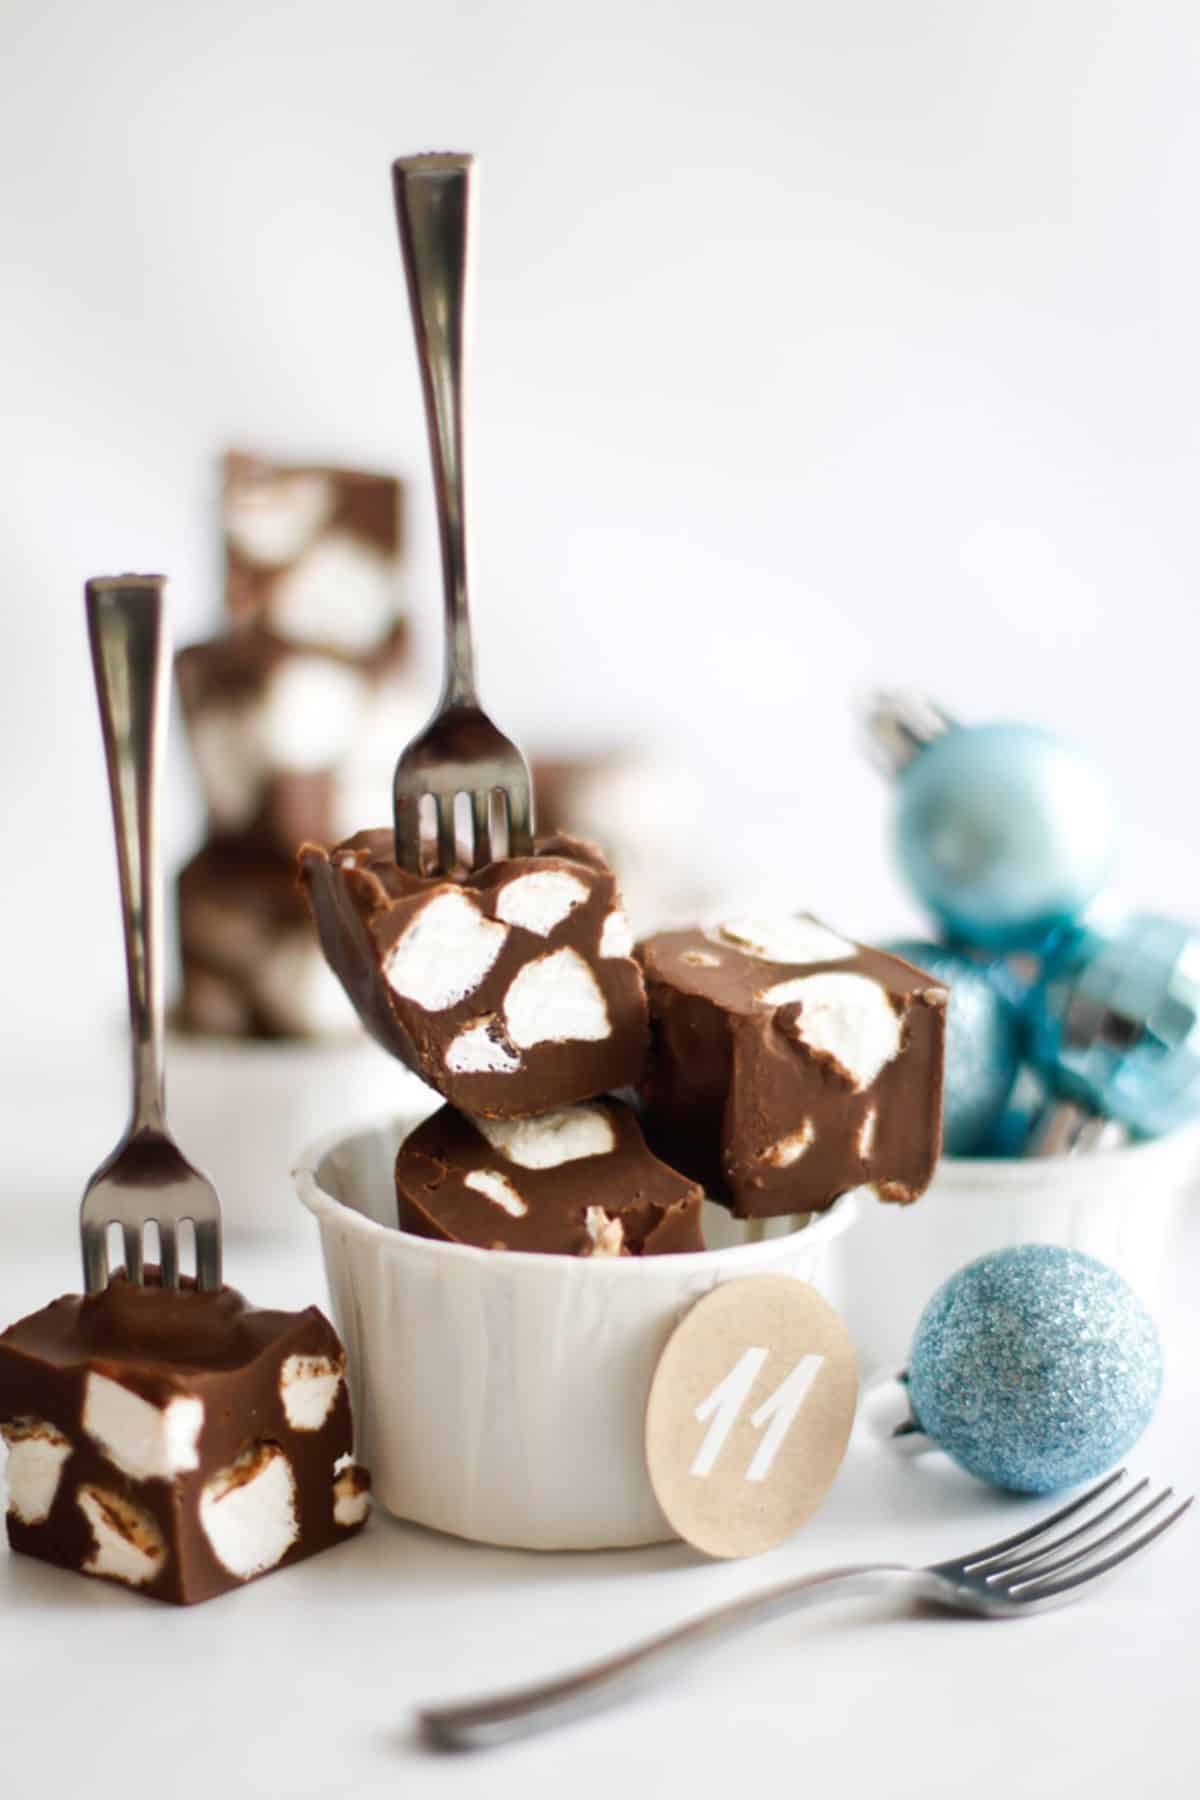 Scrumptious 3 ingredient peanut butter marshmallow candies on a table.